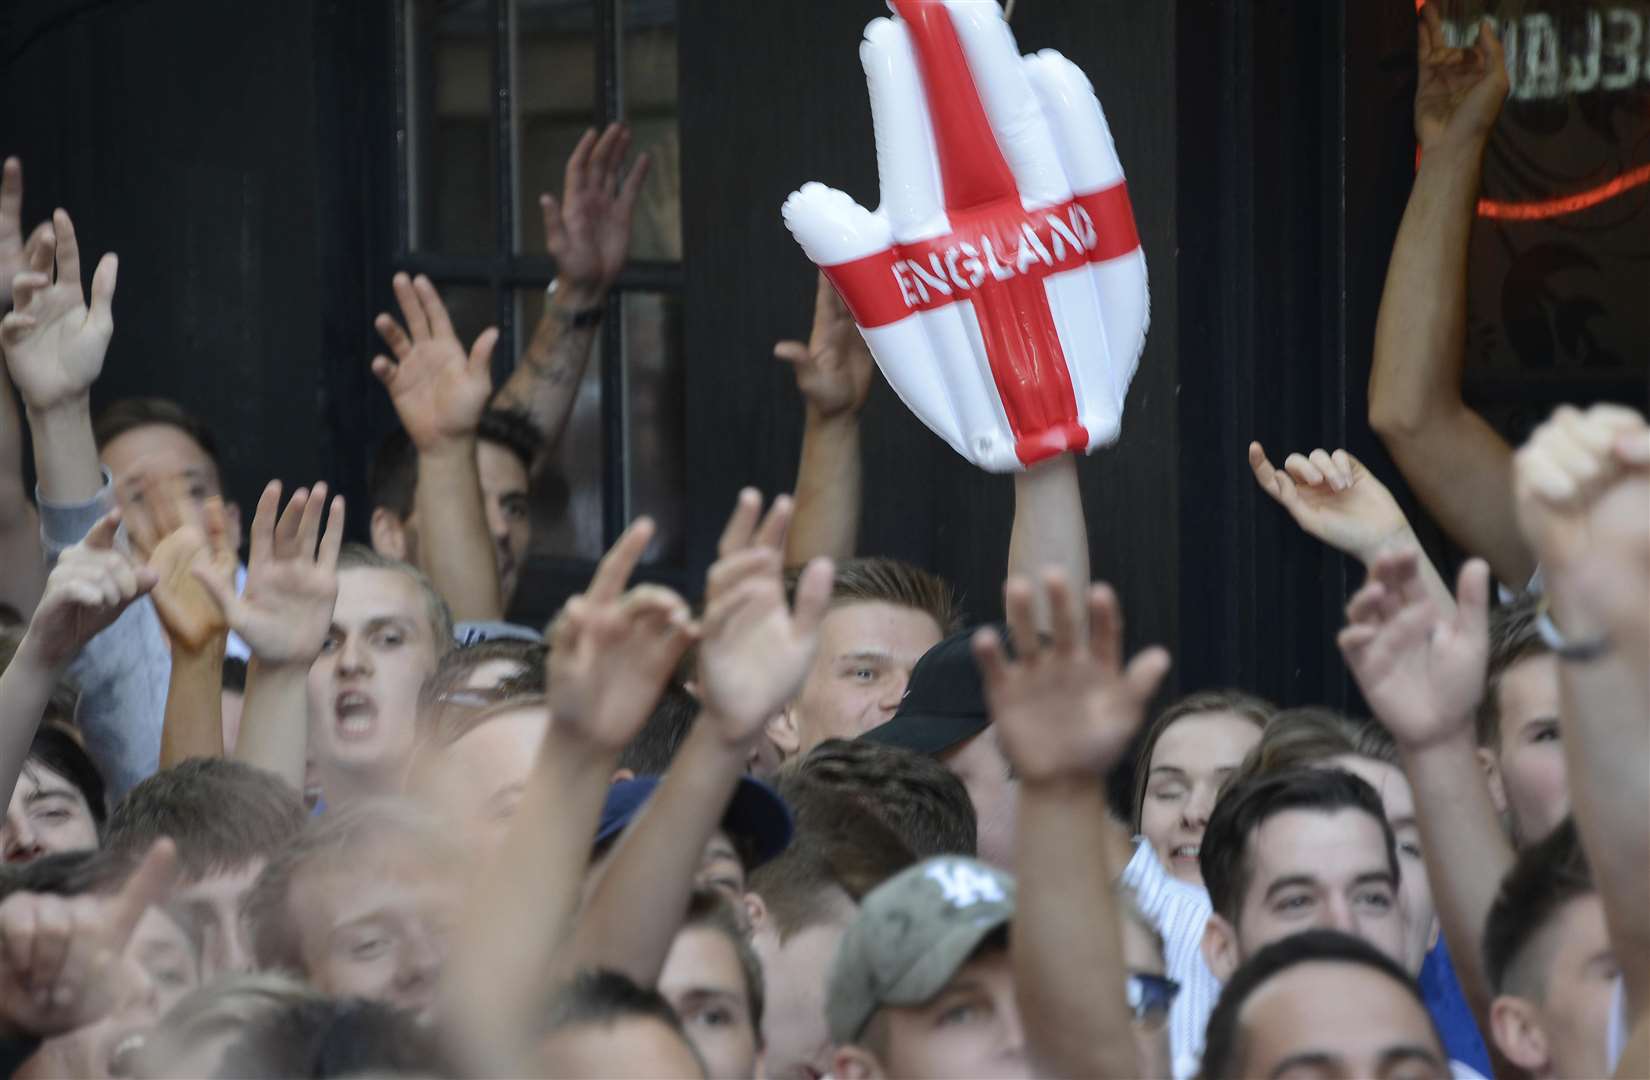 England fans are in full voice at The Source Bar in Maidstone